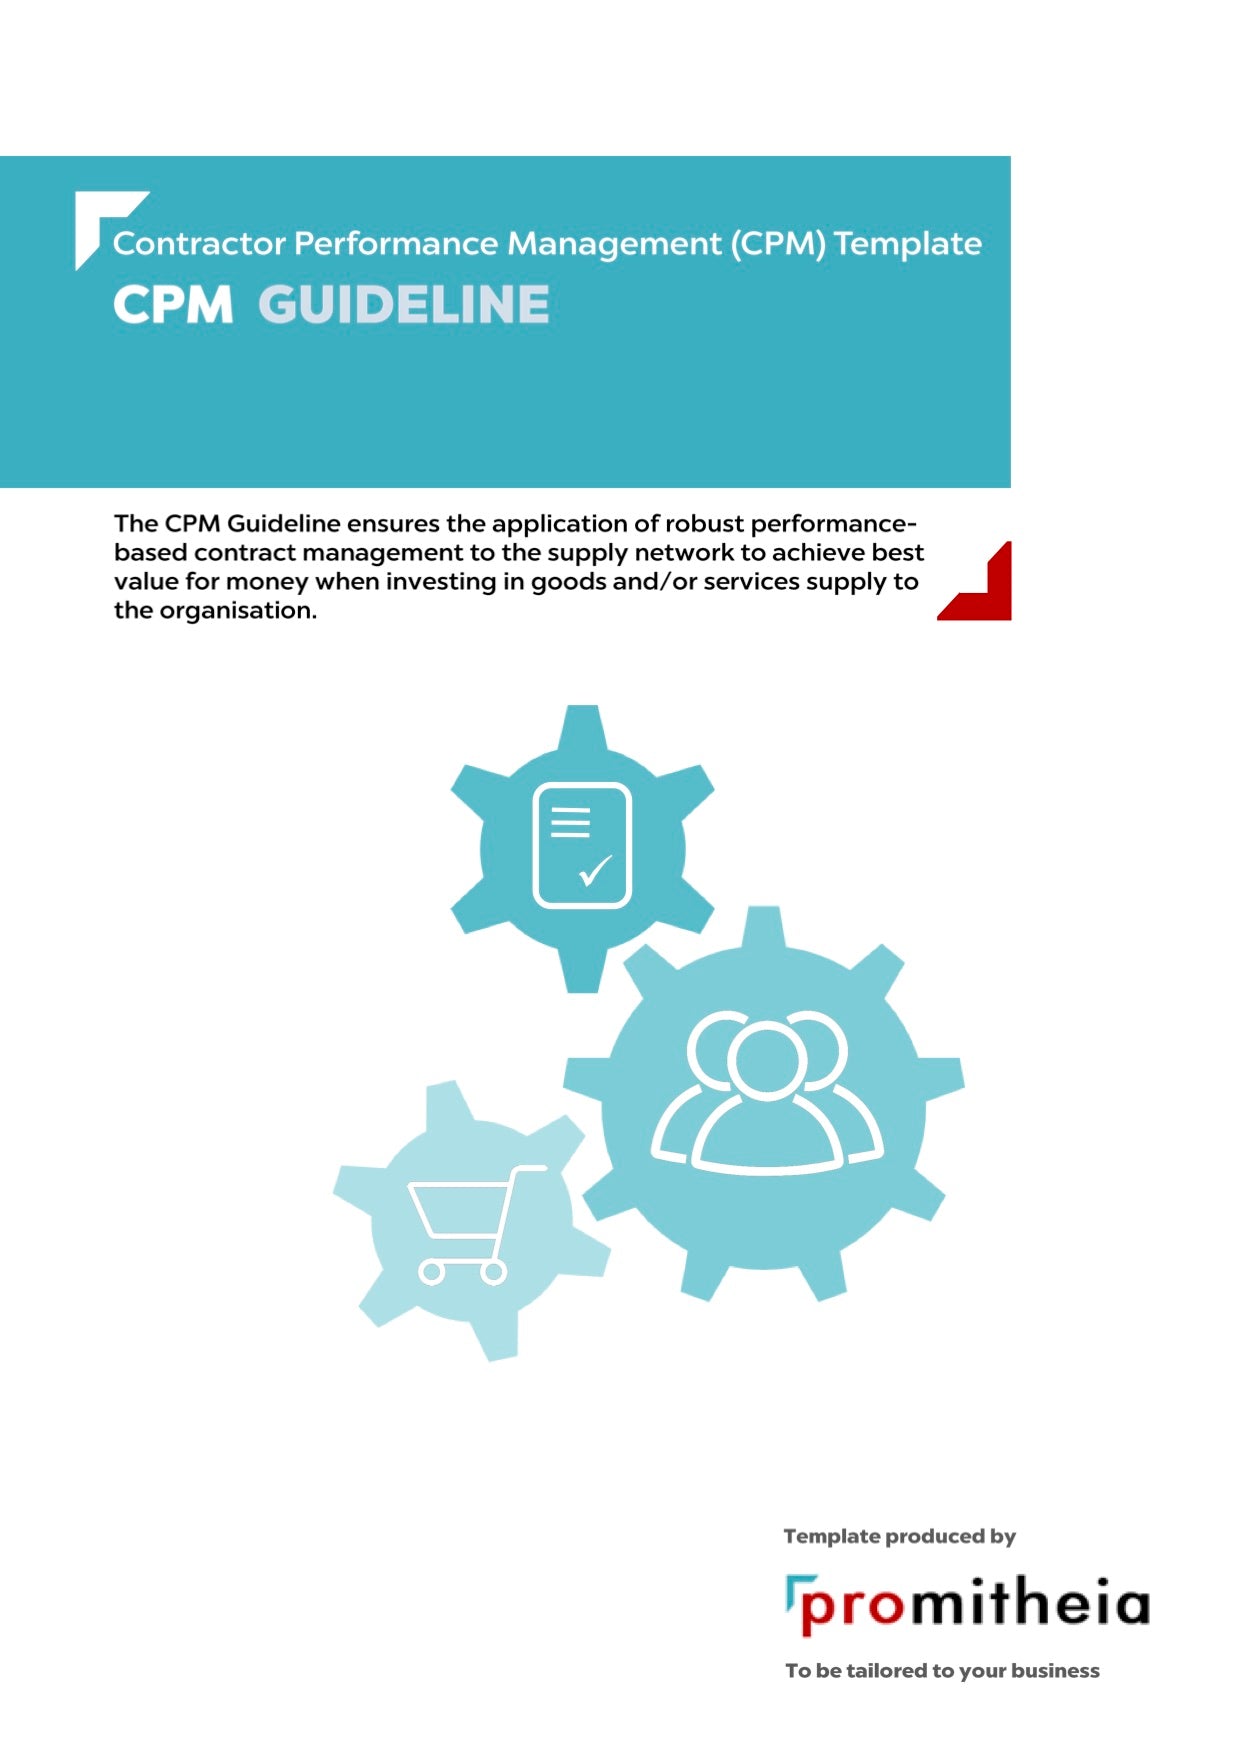 Contractor Performance Management (CPM) Guideline